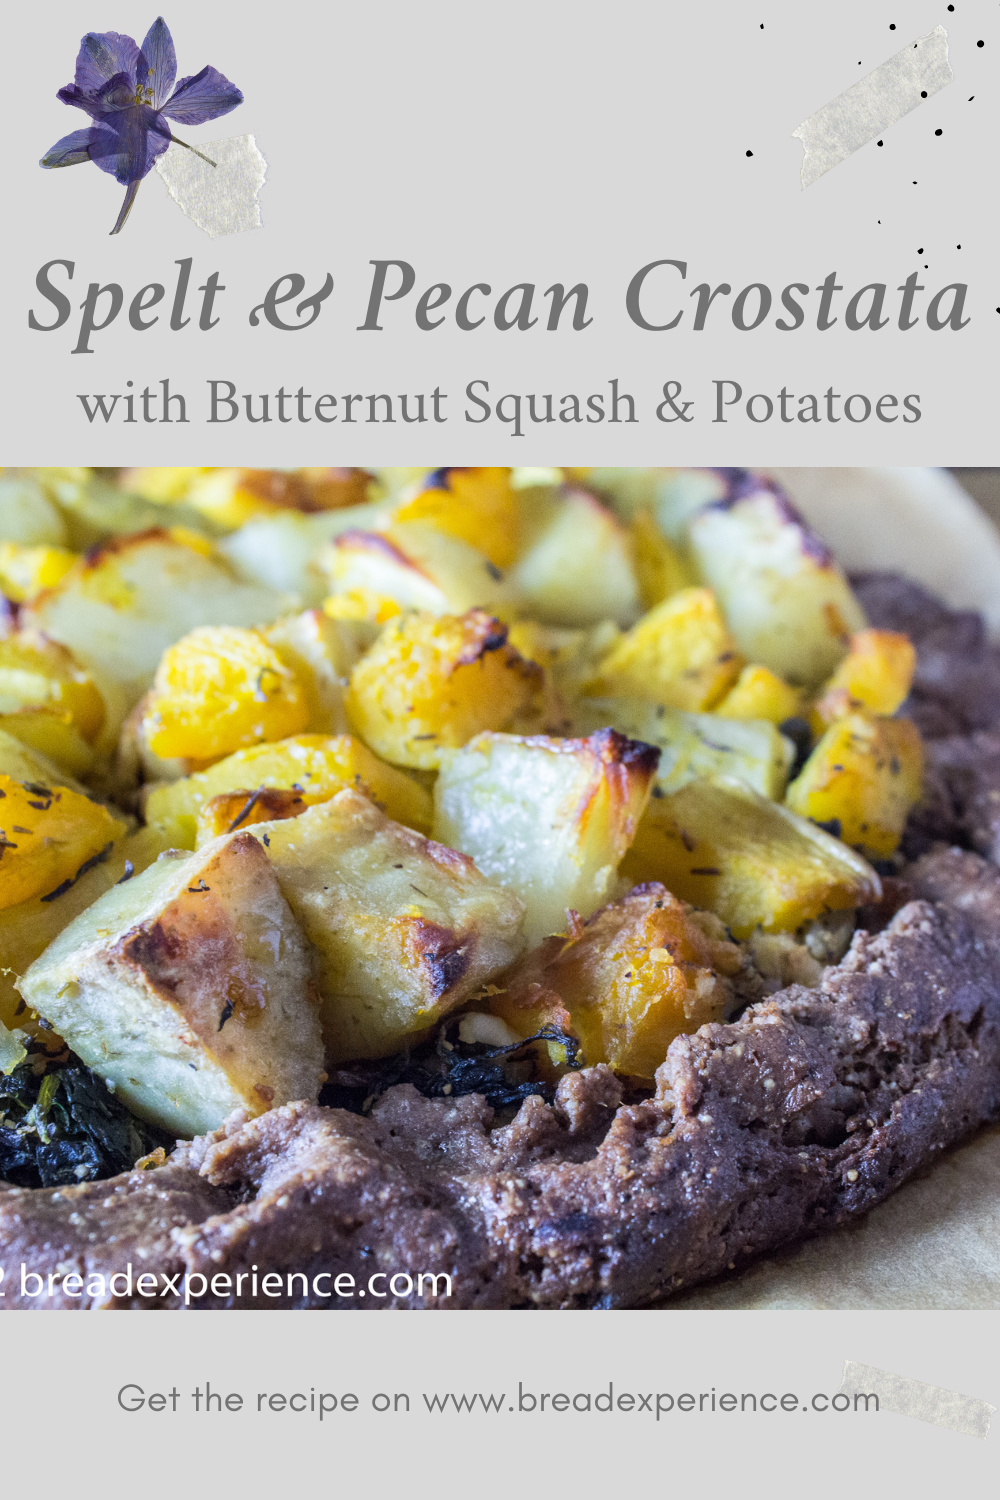 Spelt & Pecan Crostata with Roasted Butternut Squash and Potatoes